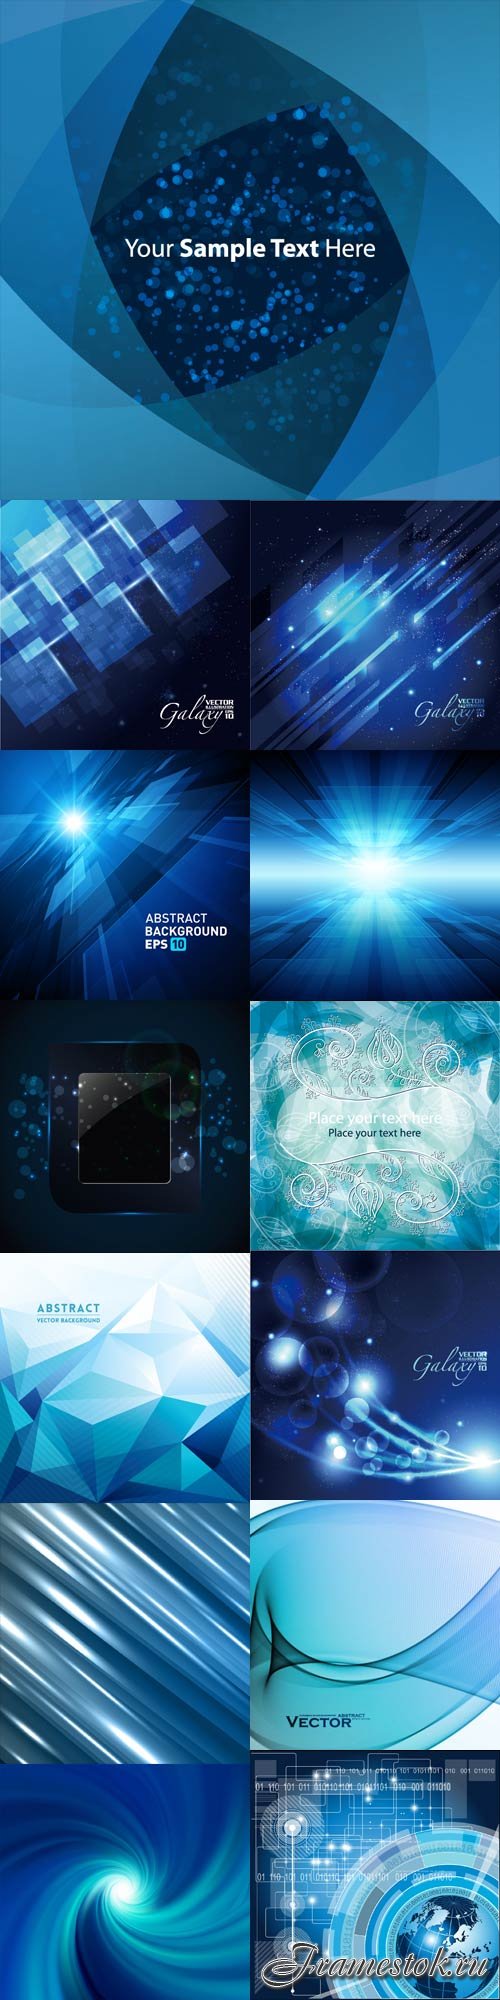 Blue abstract backgrounds vector